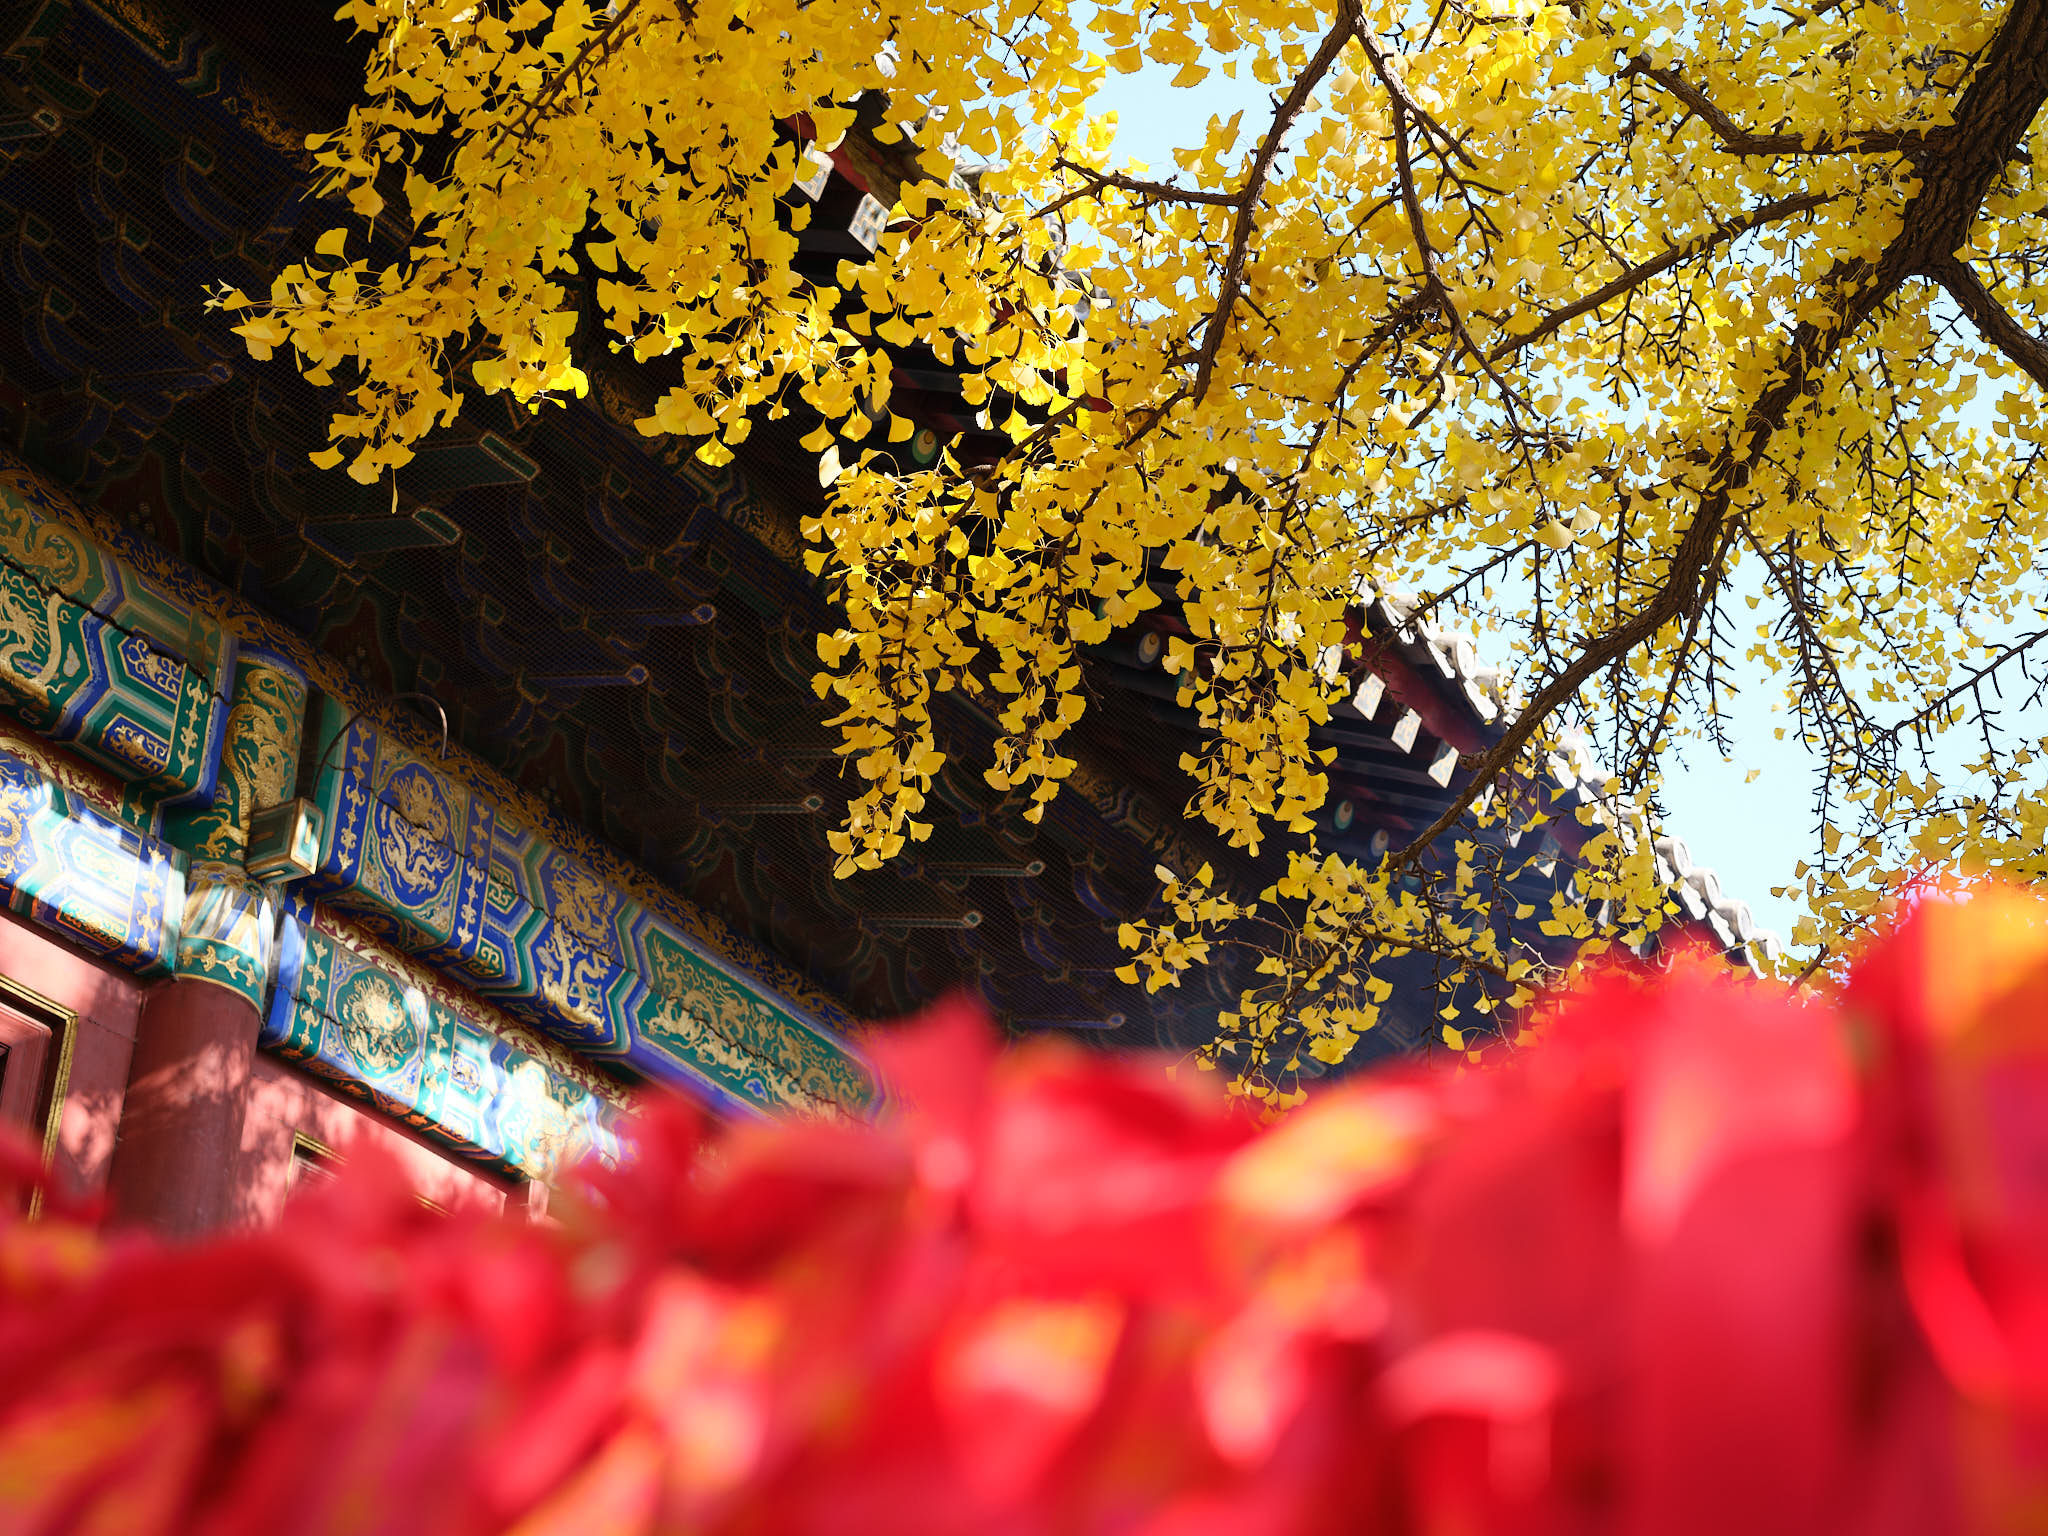 Blurred ribbons in front of temple with yellow autumn leaves in Yanqi Lake of Beijing